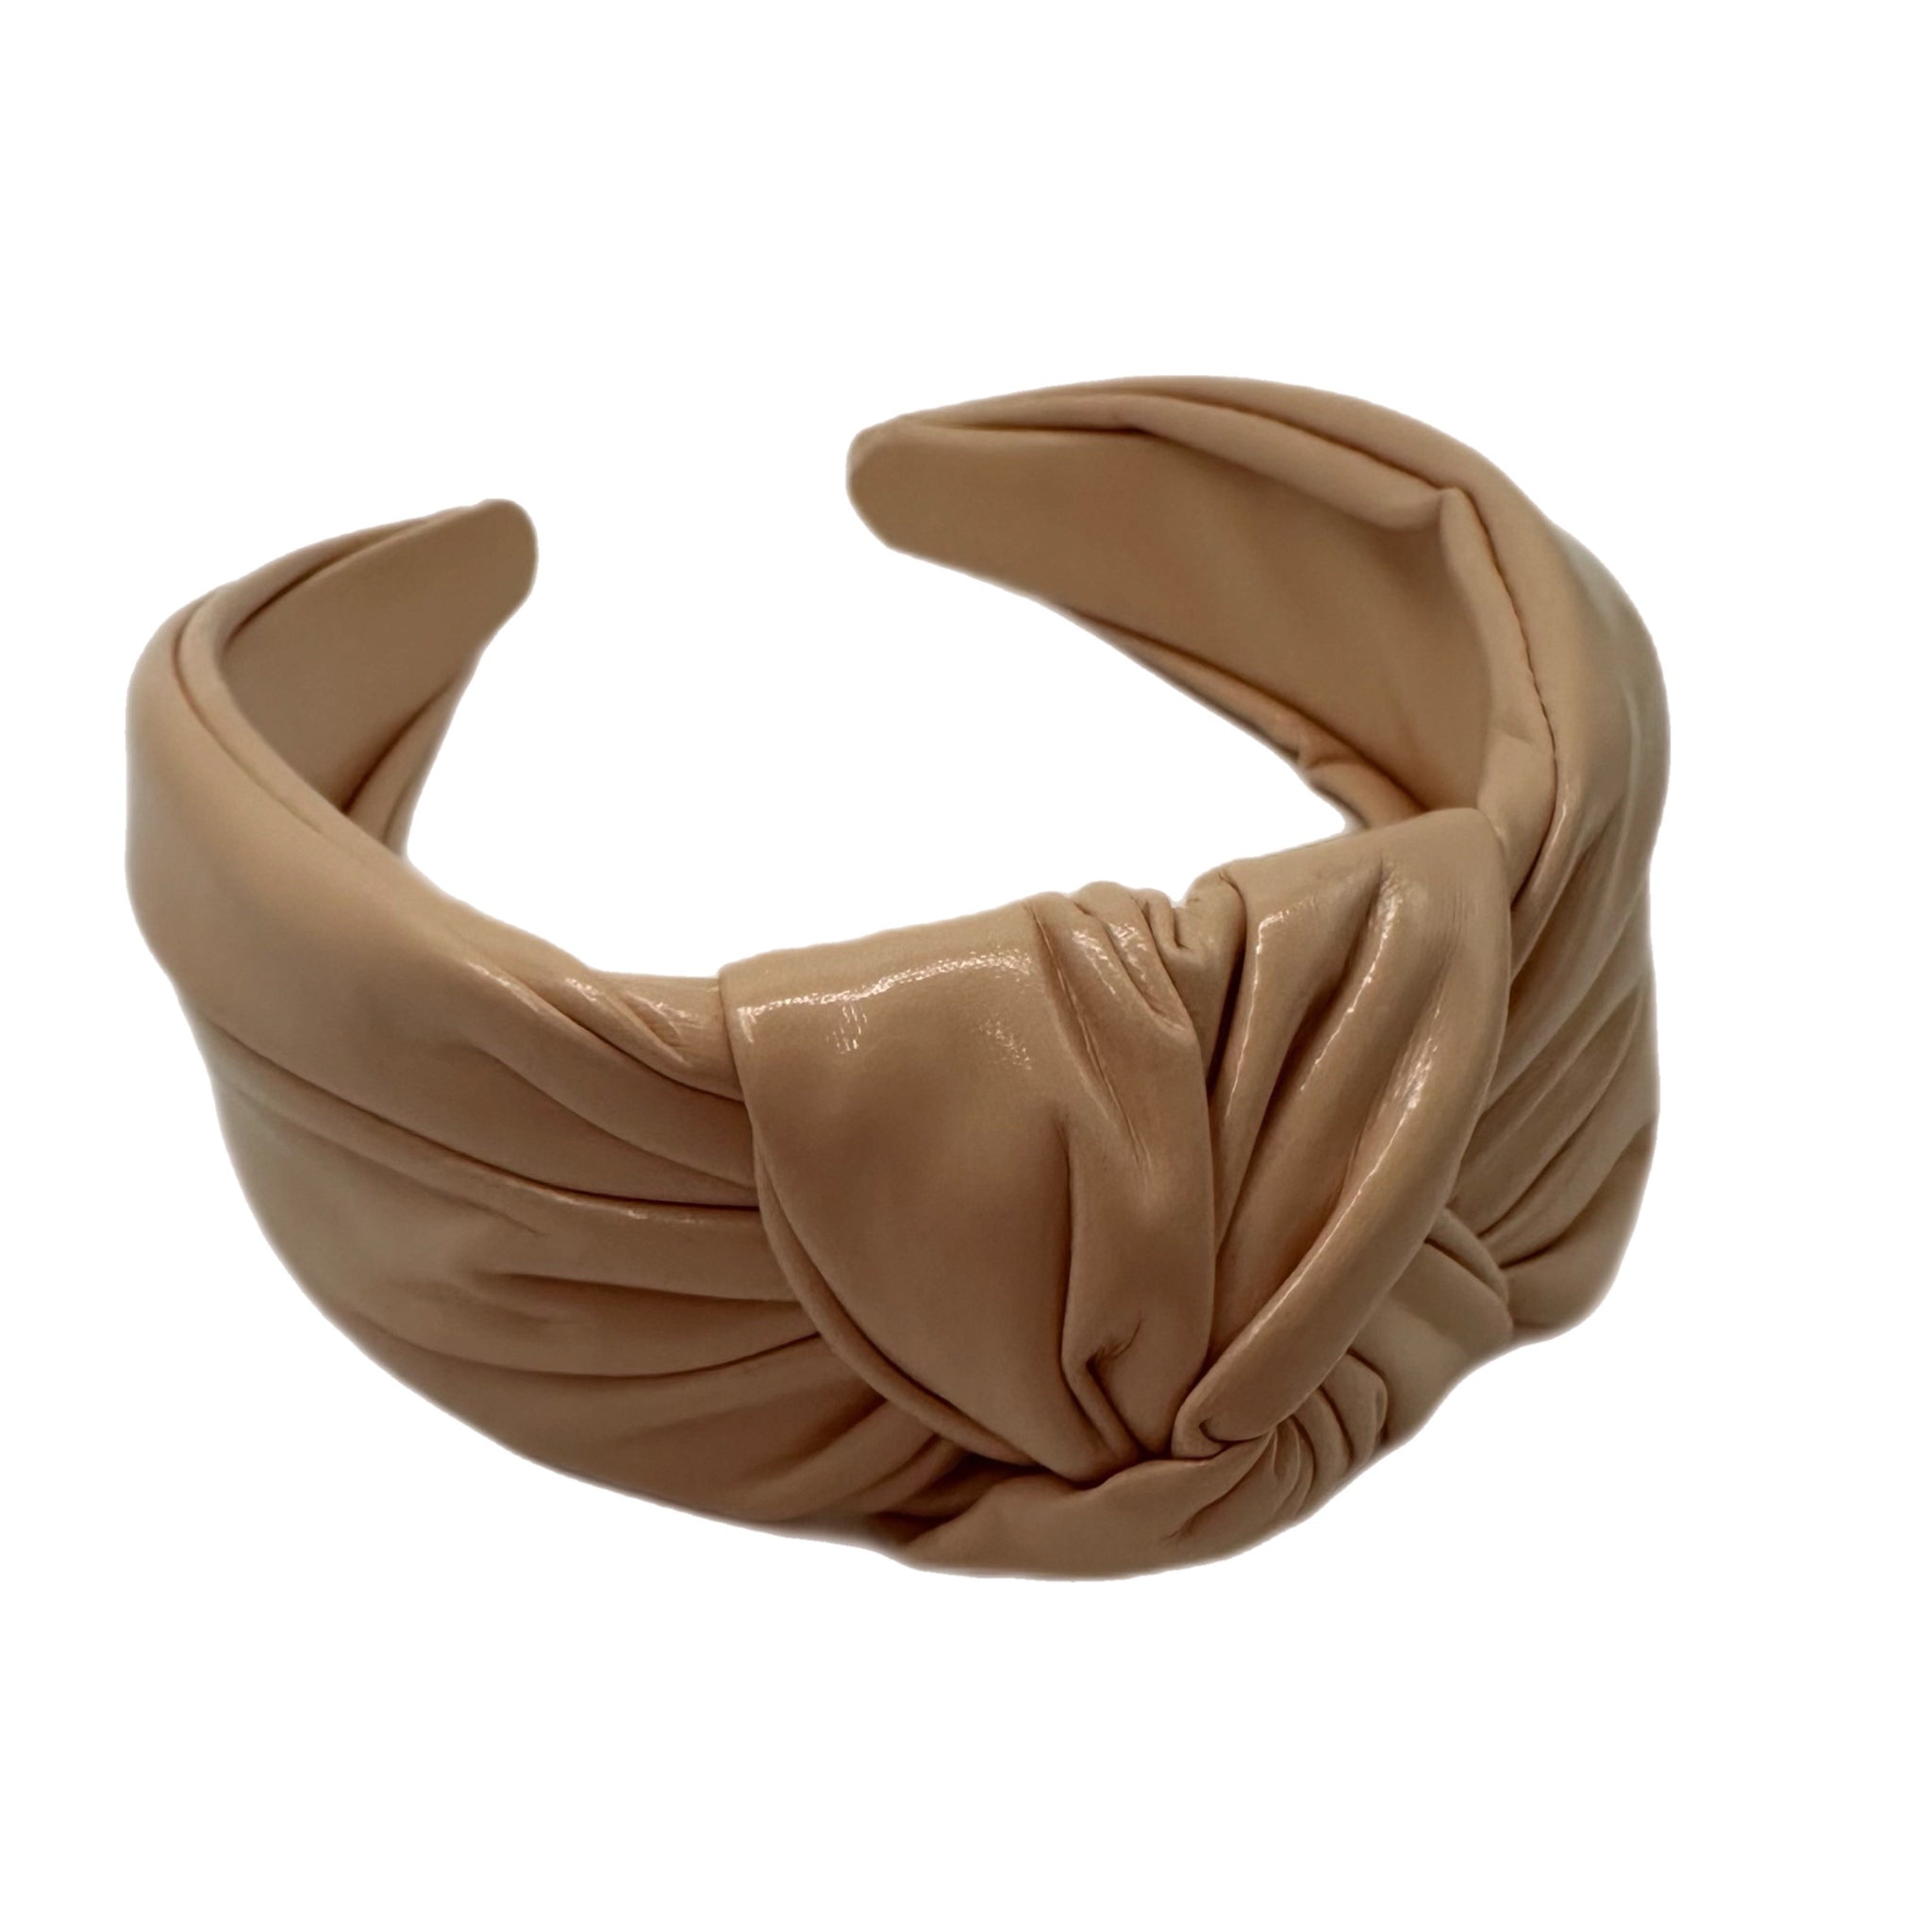 Nude Patent Leather Knotted Headband